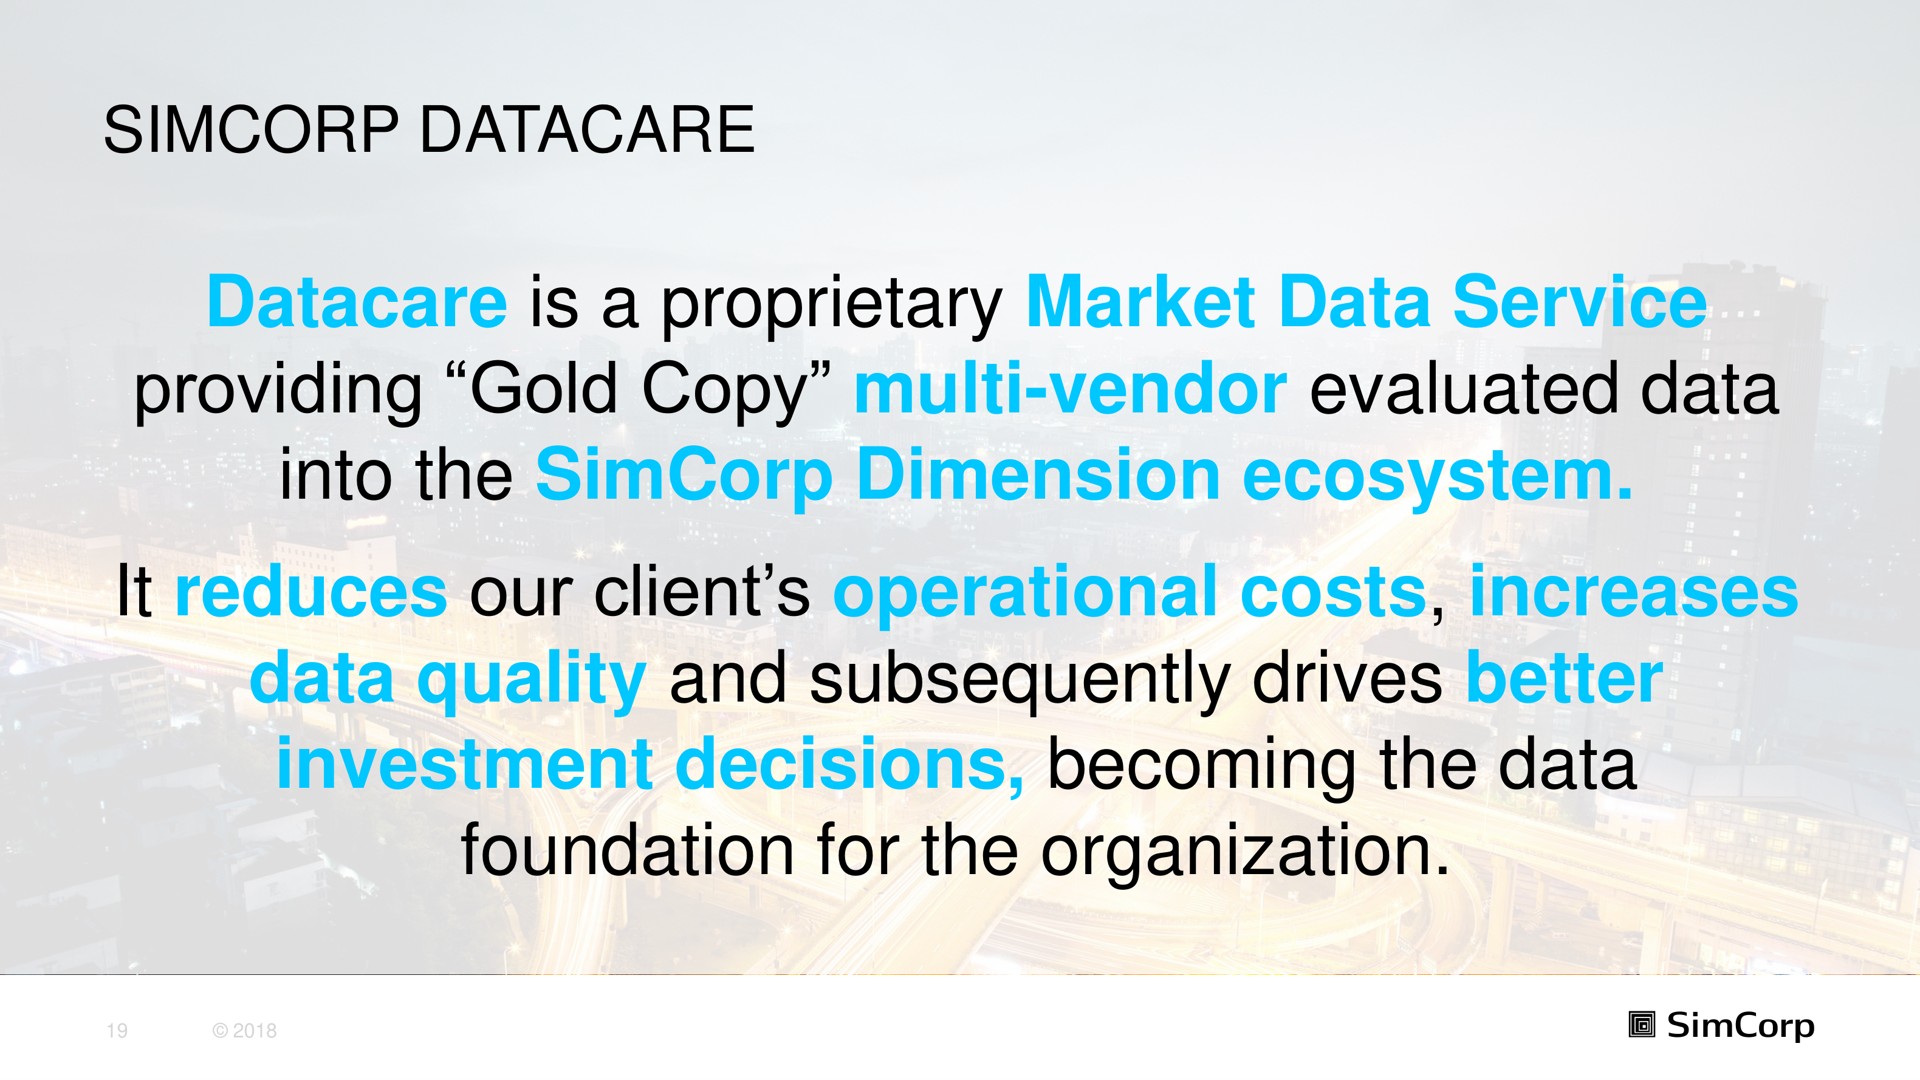 is a proprietary market data service providing gold copy vendor evaluated data into the dimension ecosystem it reduces our client operational costs increases data quality and subsequently drives better investment decisions becoming the data foundation for the organization | SimCorp